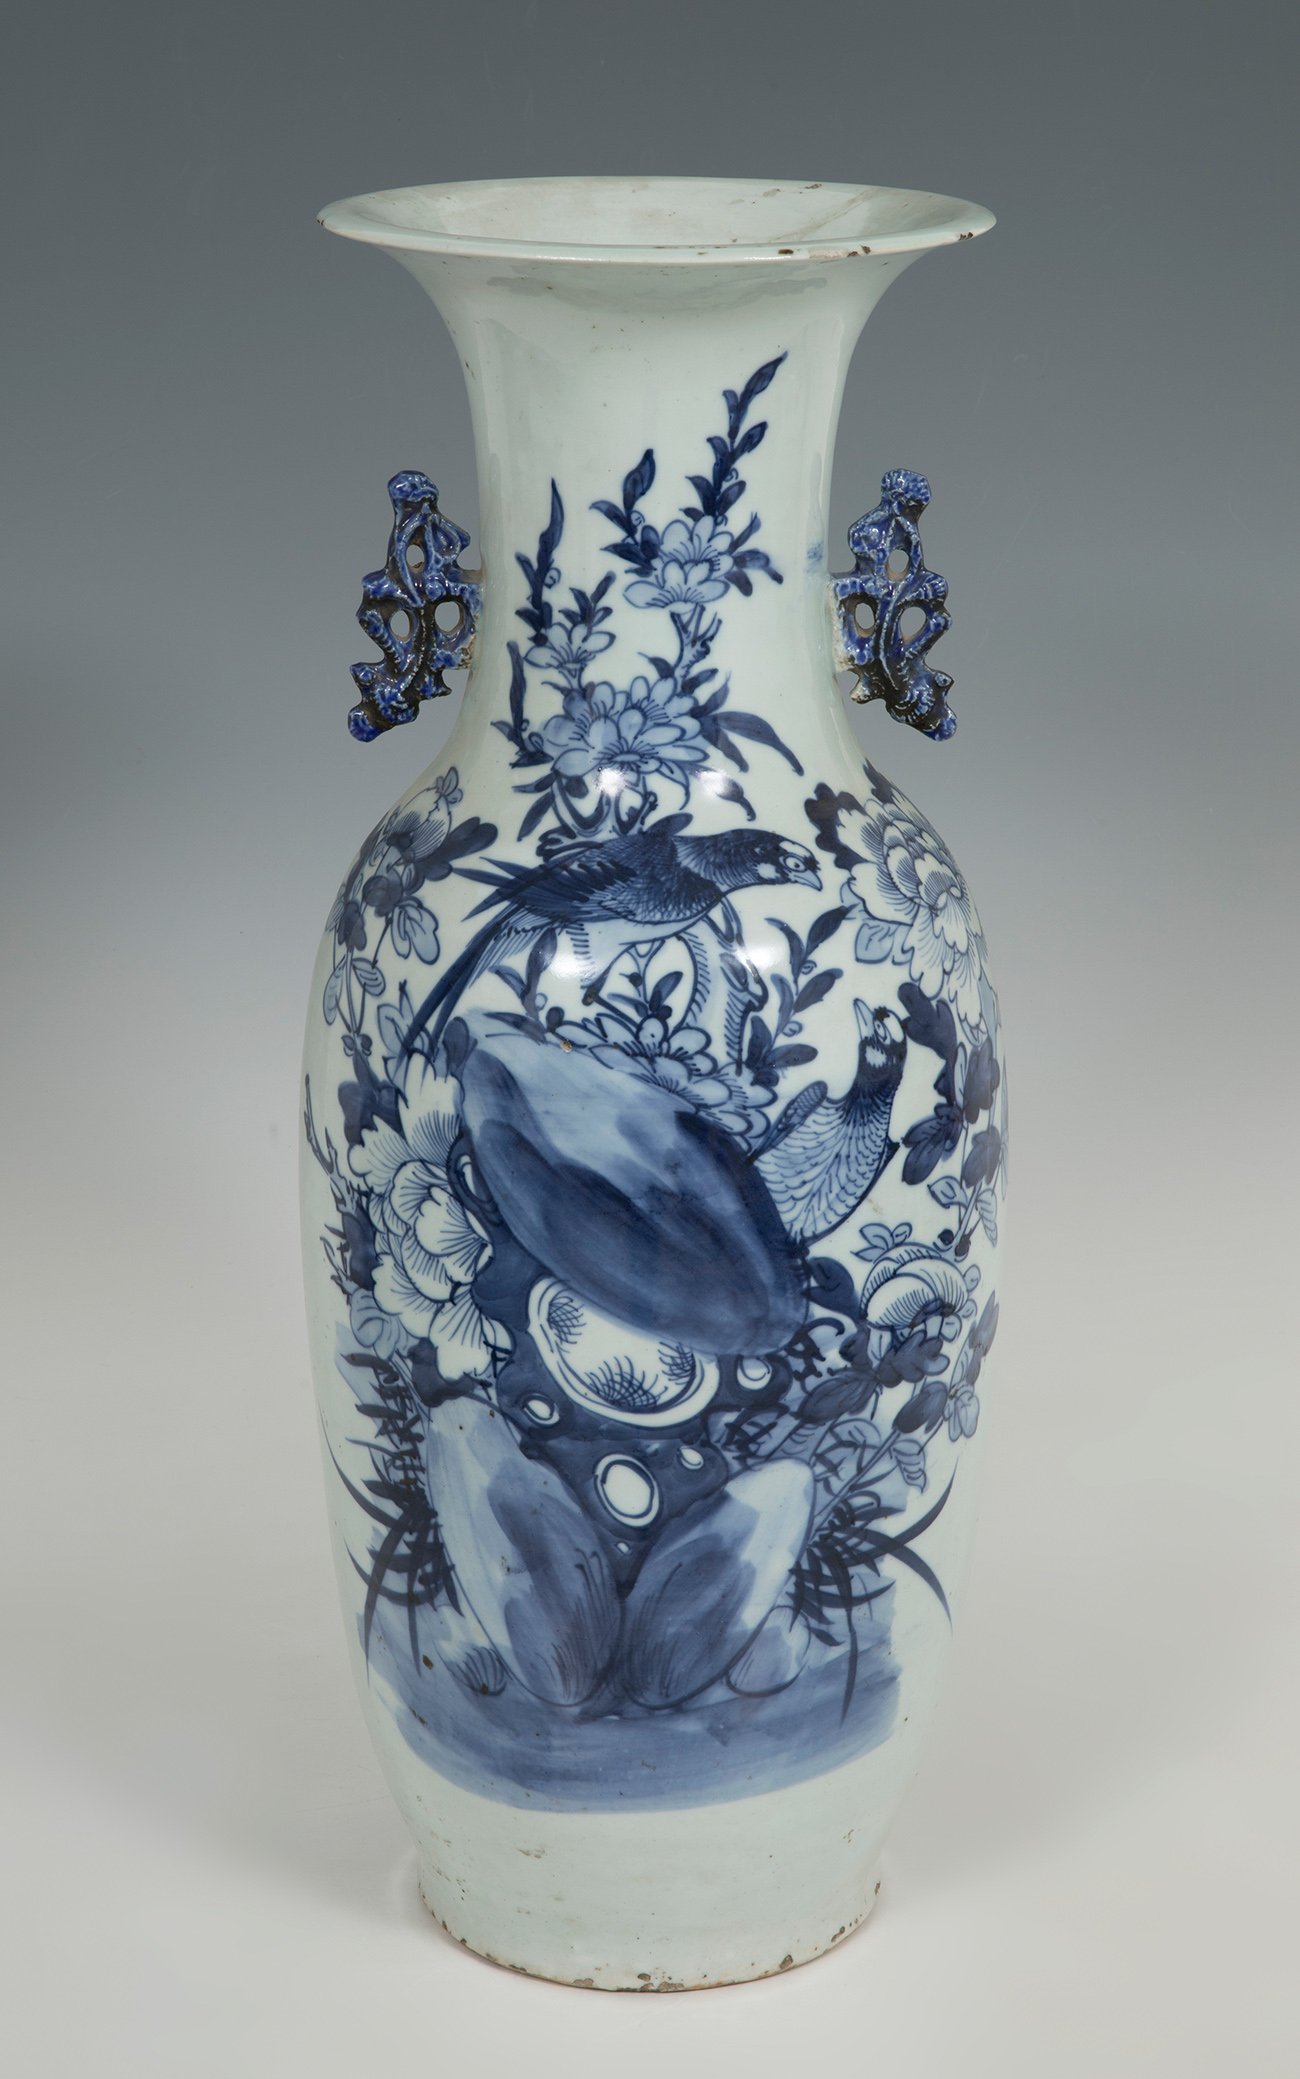 Vase. China, Qing Dynasty, 1664-1911.Enamelled porcelain.The lip is slightly pitted.Measurements: 57